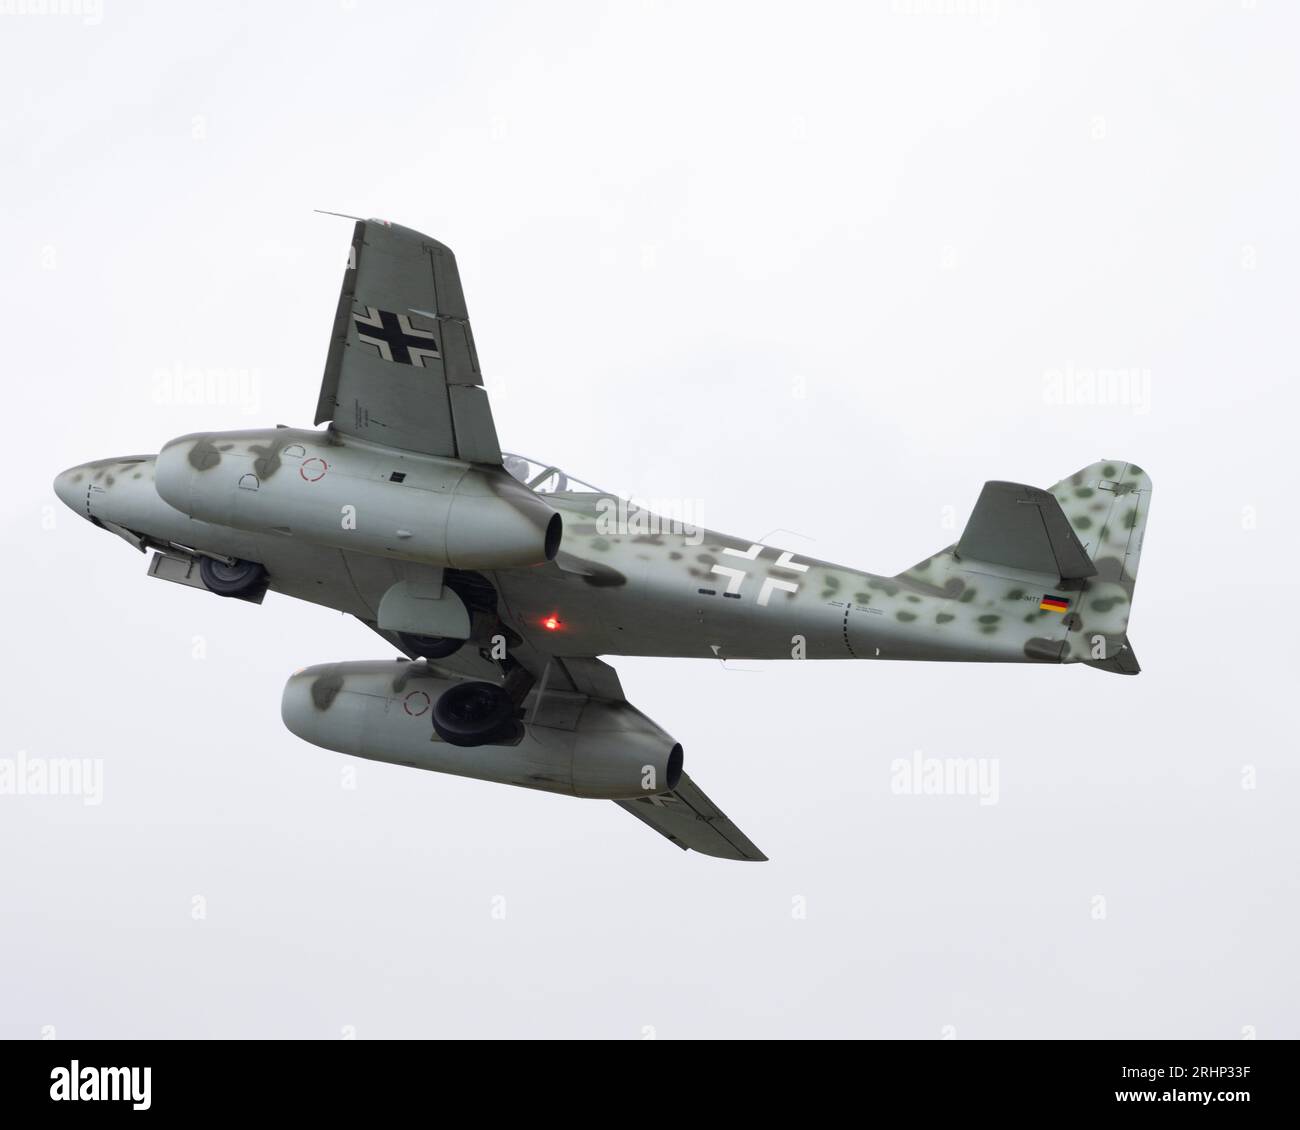 A replica of the German Me262 World War Two jet fighter flying at the 2023 Royal International Air Tattoo Stock Photo